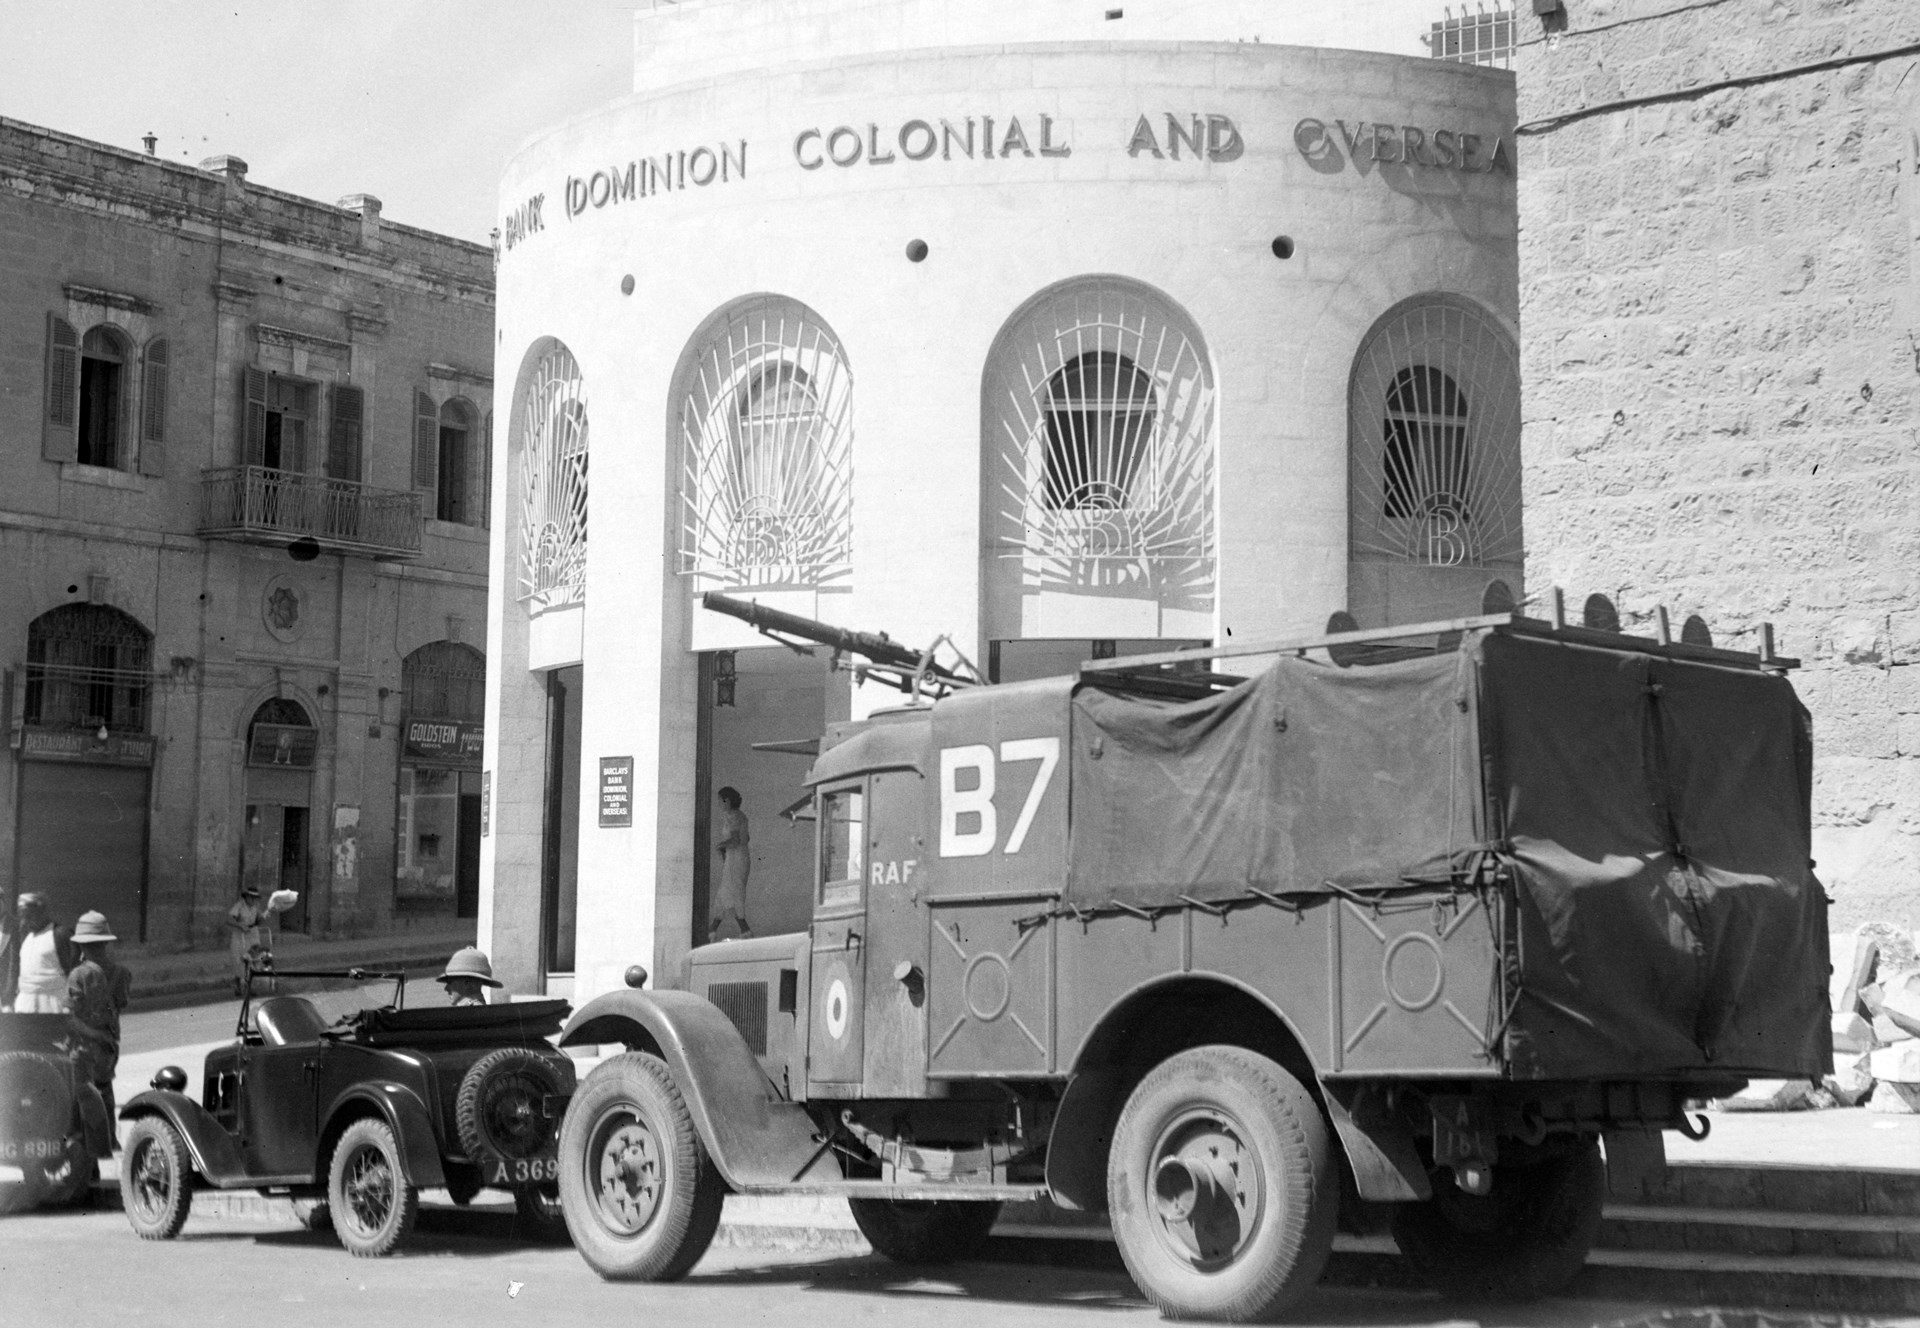 A great deal of British force’s attention was consumed by convoy escort, protecting government, transportation, and communications facilities, and securing financial institutions.  These RAF vehicles are seen outside Barclays Bank.  Note the Lewis gun in a traversing AA mount.  Library of Congress